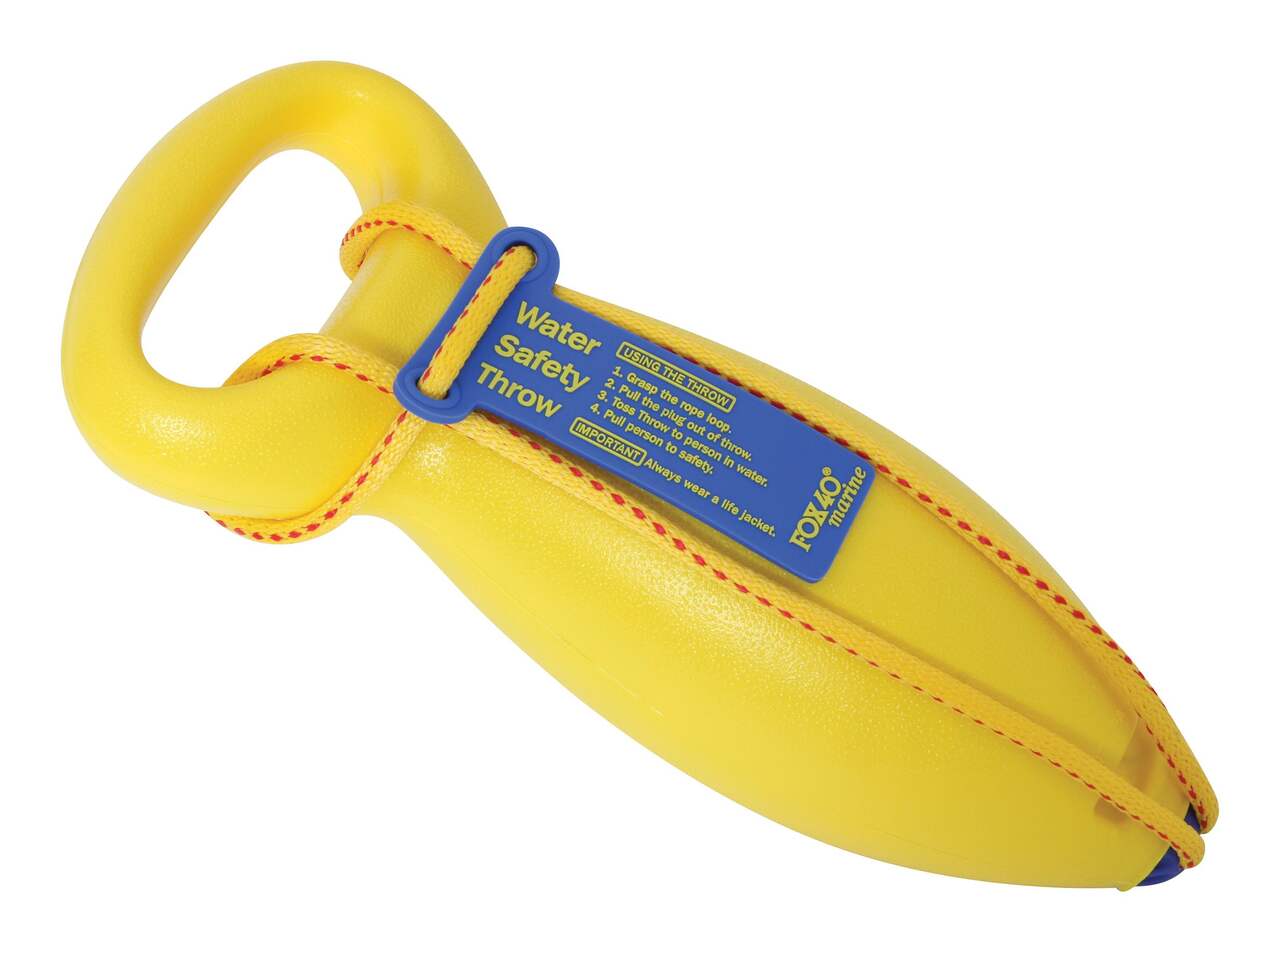 Fox 40 Boat Safety Rope, Yellow, 3/8-in x 50-ft